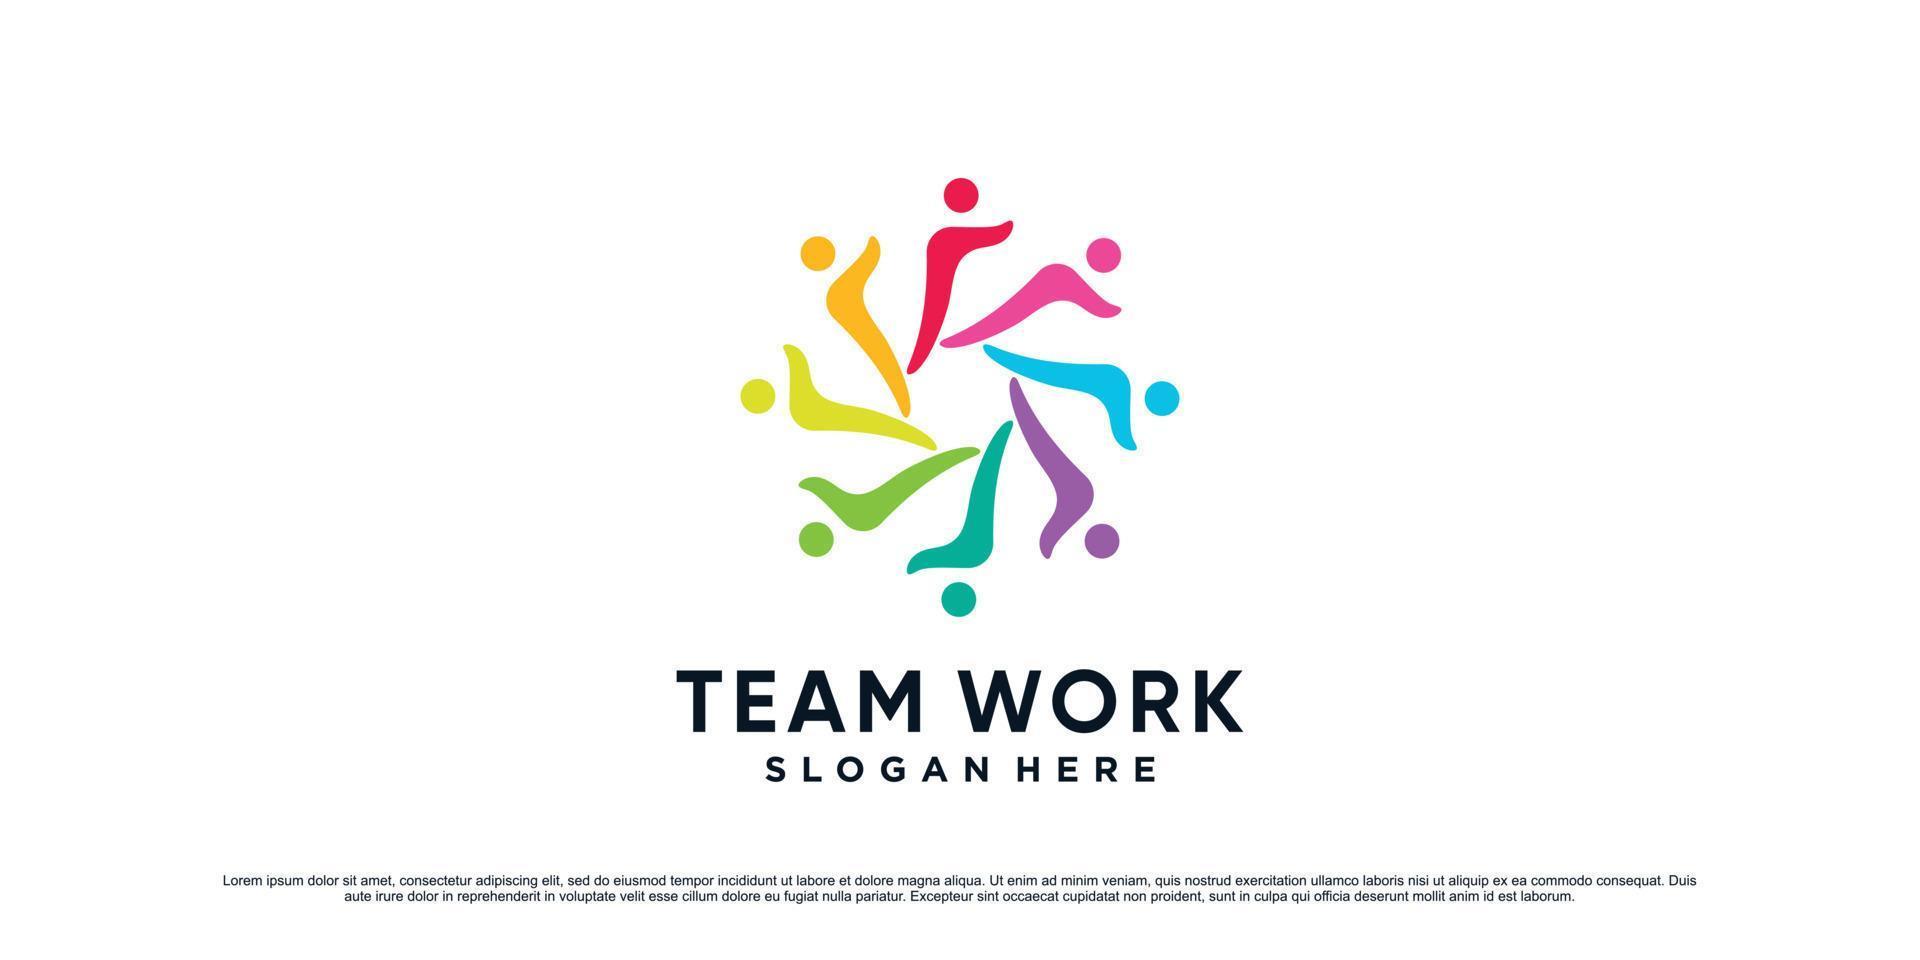 Team work together logo design illustration for people community icon with unique concept vector